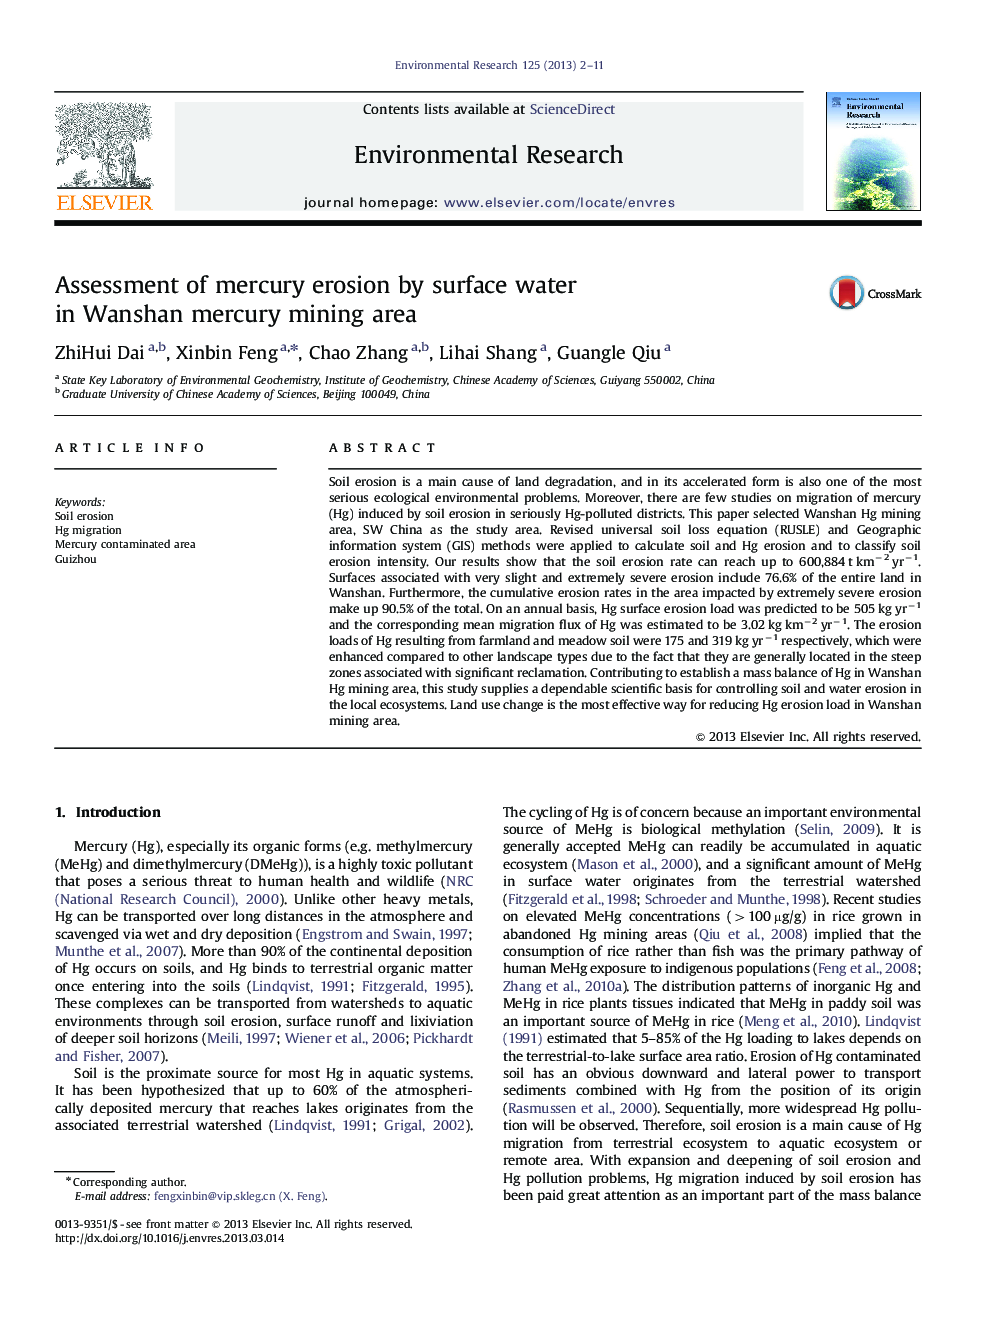 Assessment of mercury erosion by surface water in Wanshan mercury mining area